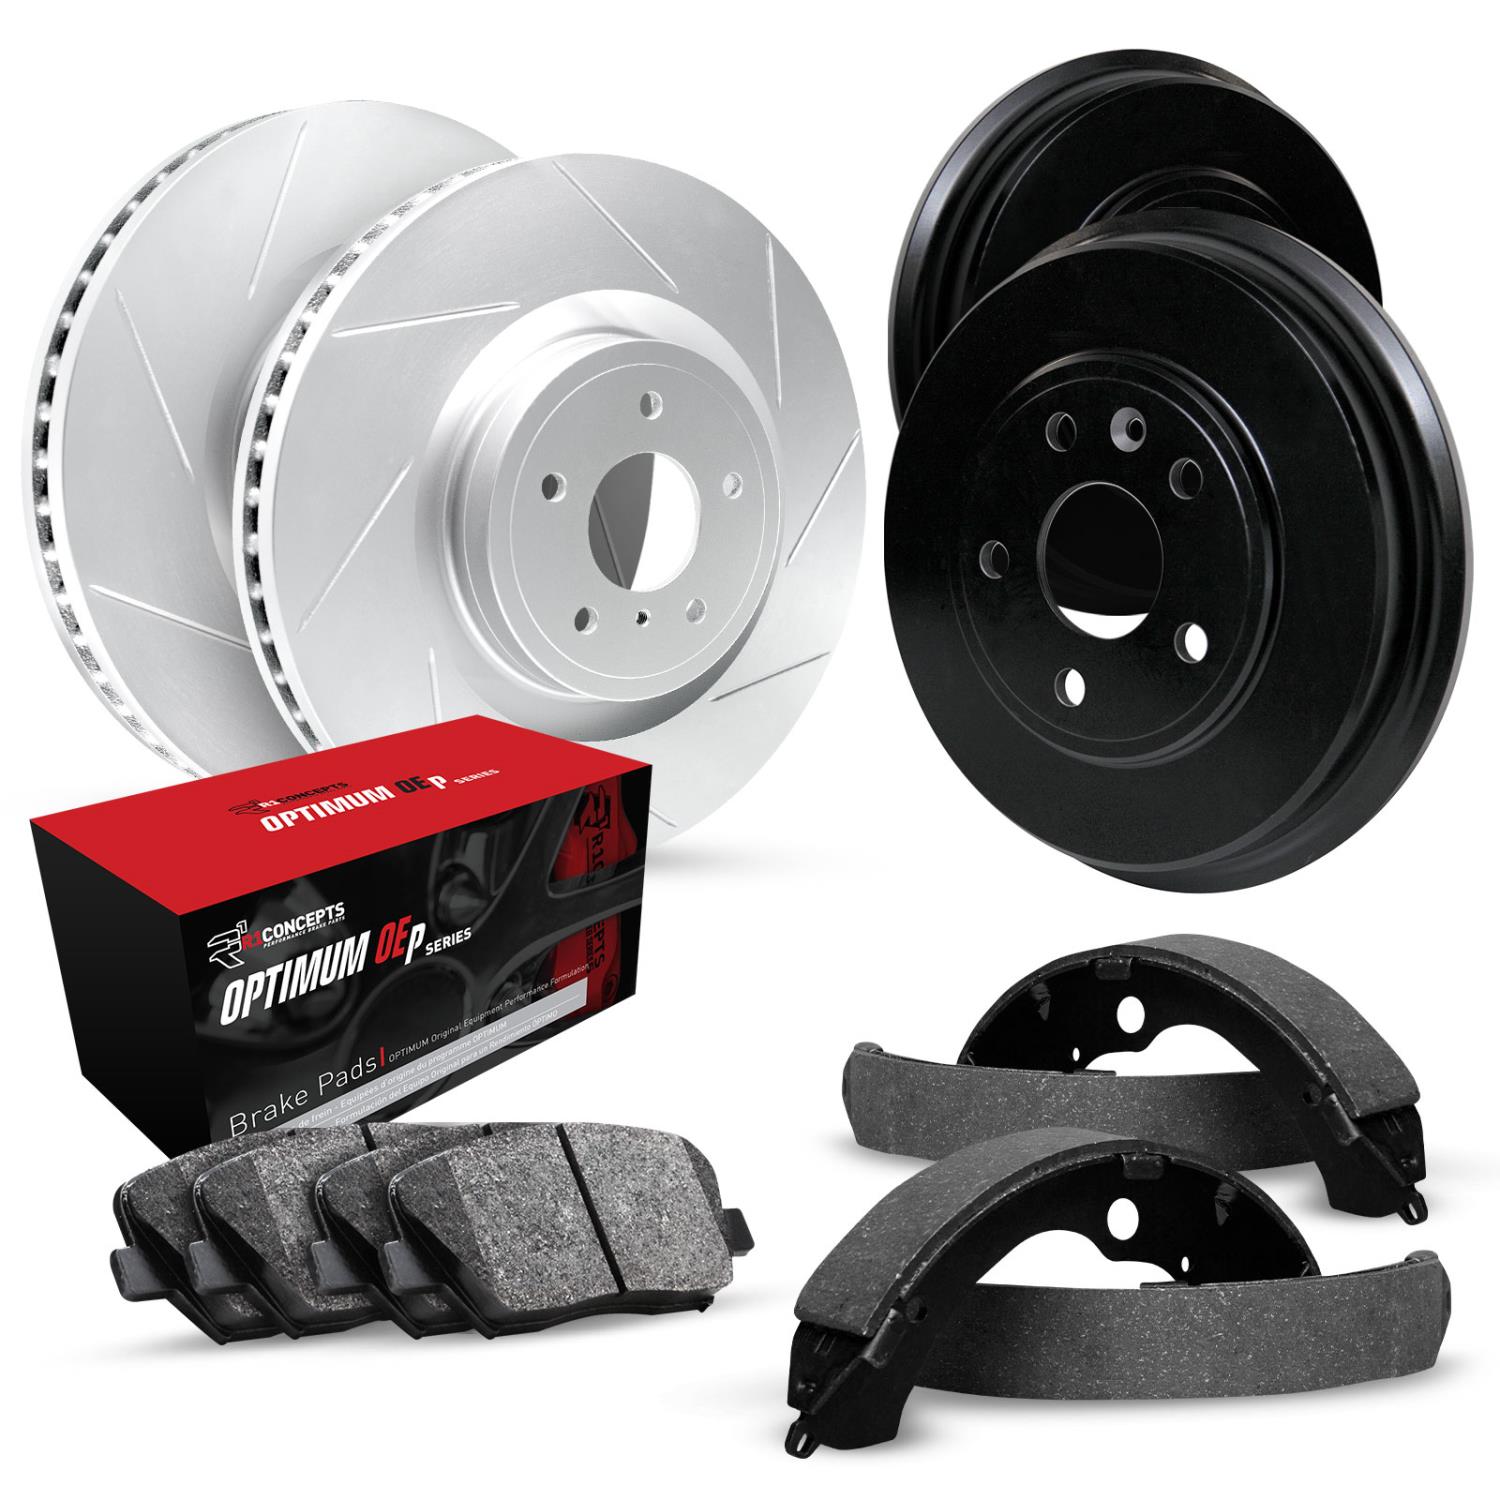 GEO-Carbon Slotted Brake Rotor & Drum Set w/Optimum OE Pads & Shoes, 1995-1998 Ford/Lincoln/Mercury/Mazda